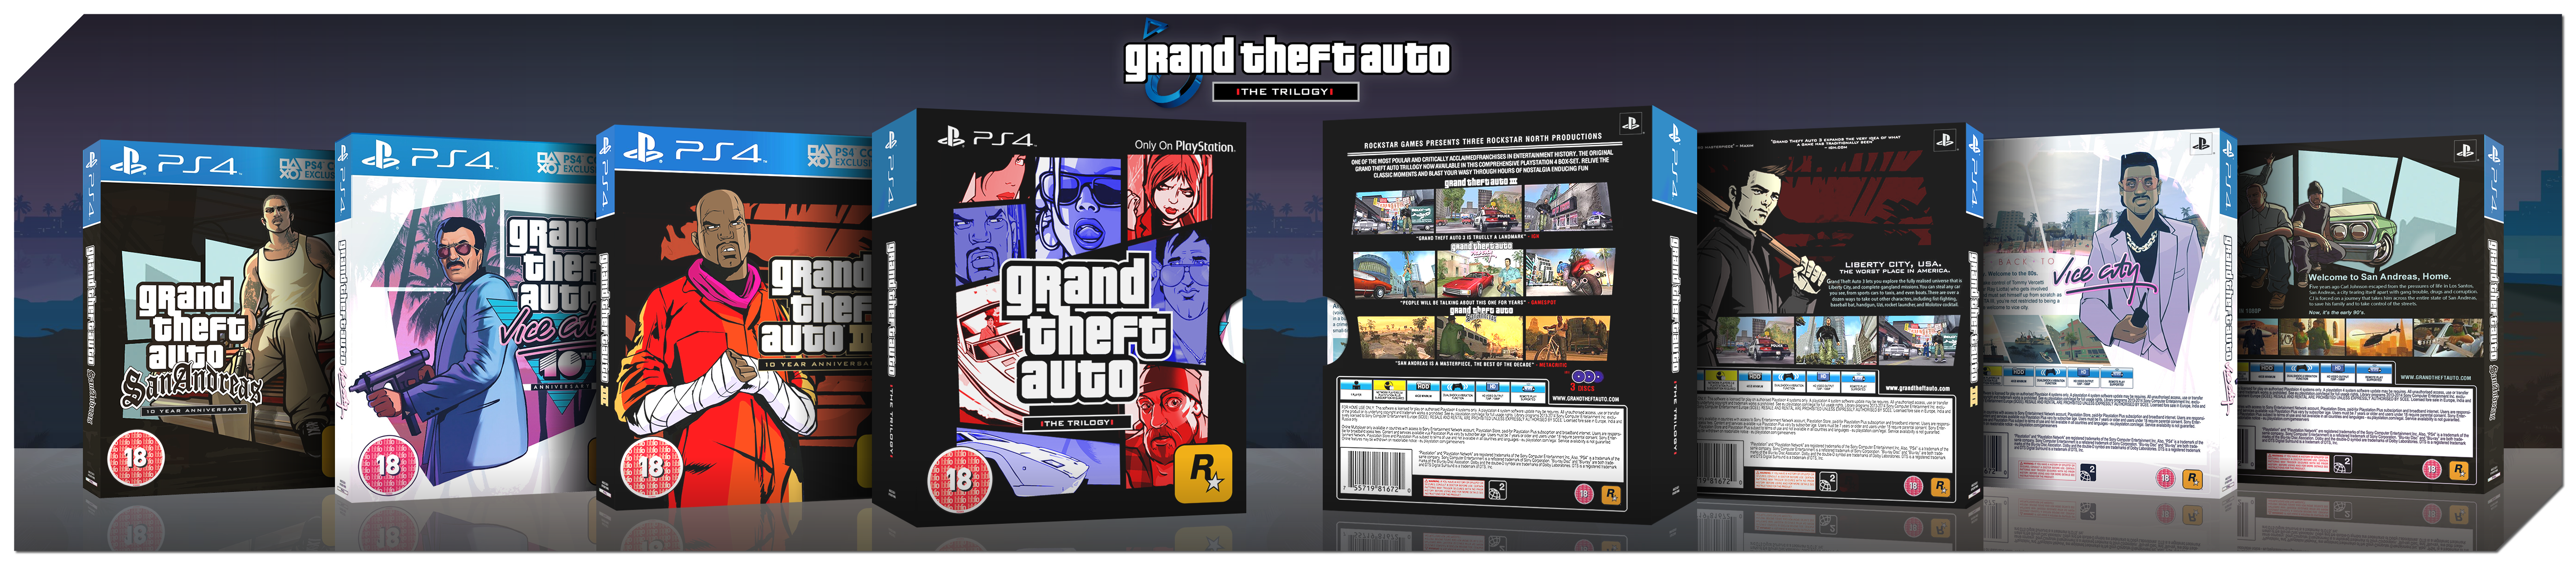 Grand Theft Auto The Trilogy box cover